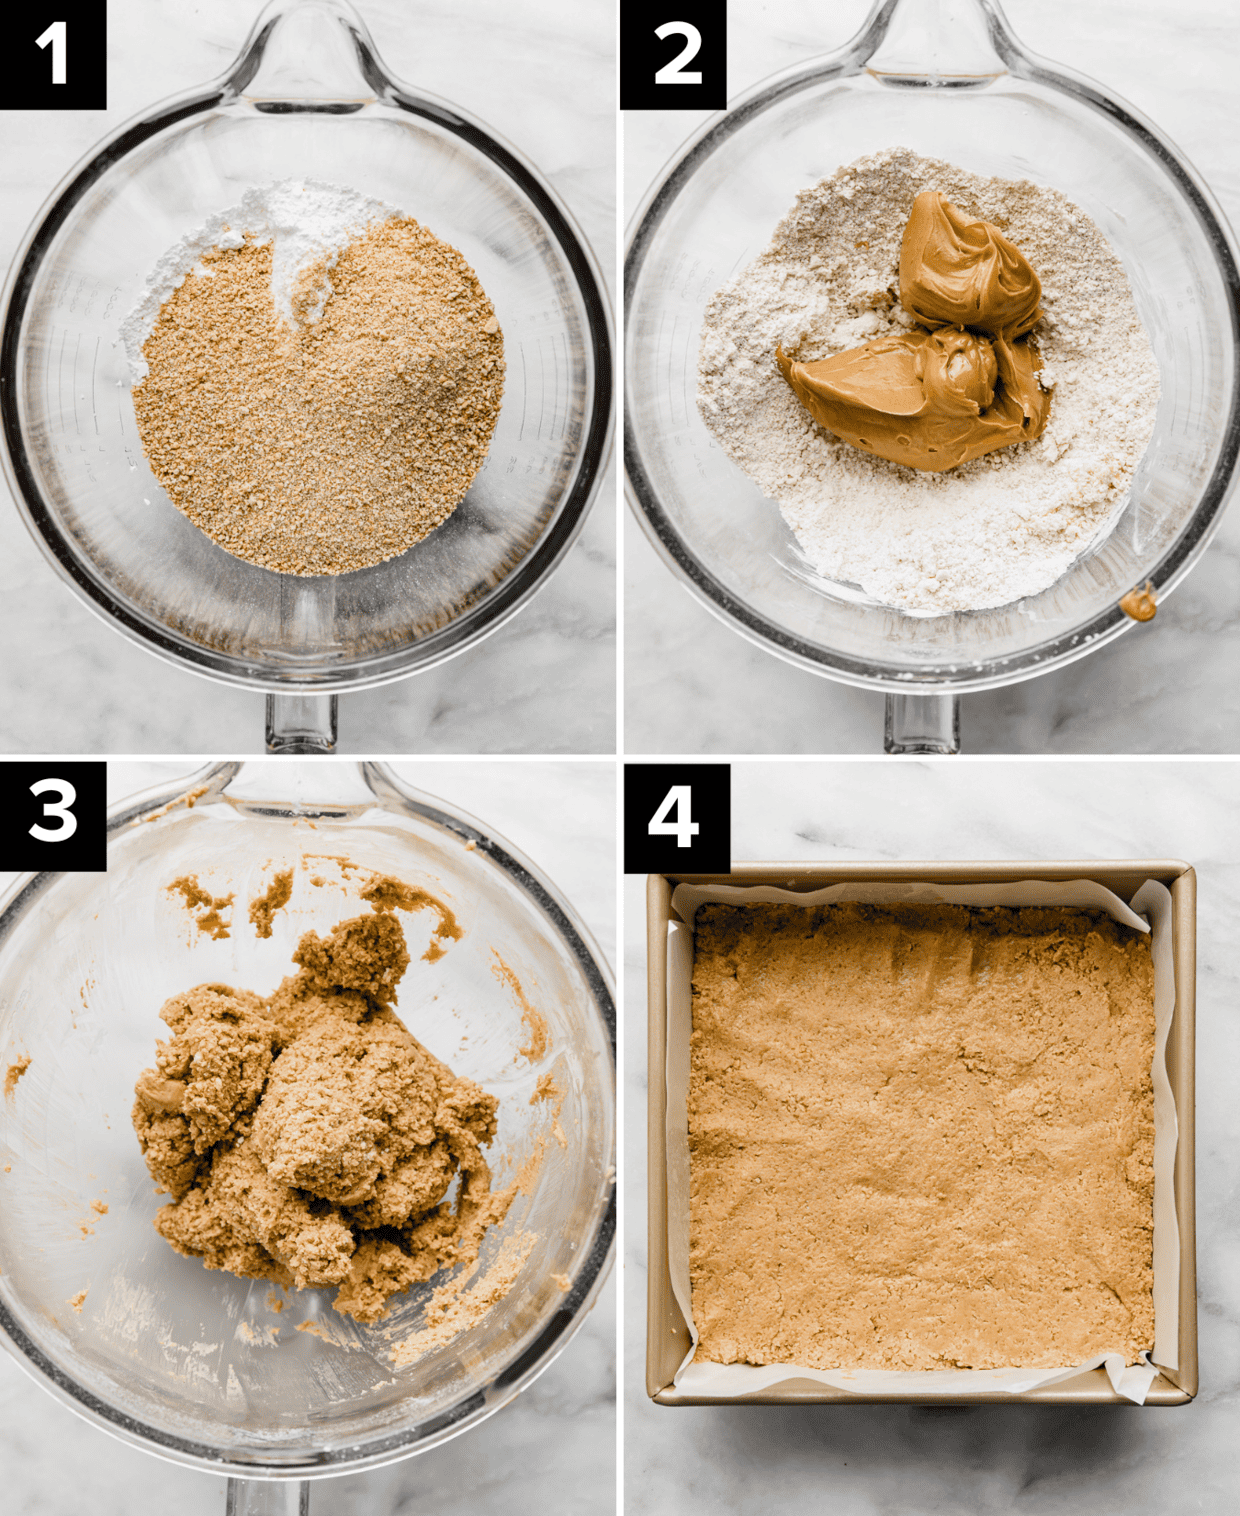 Four images showing the making of the peanut butter layer for no bake chocolate peanut butter bars made with graham crackers.